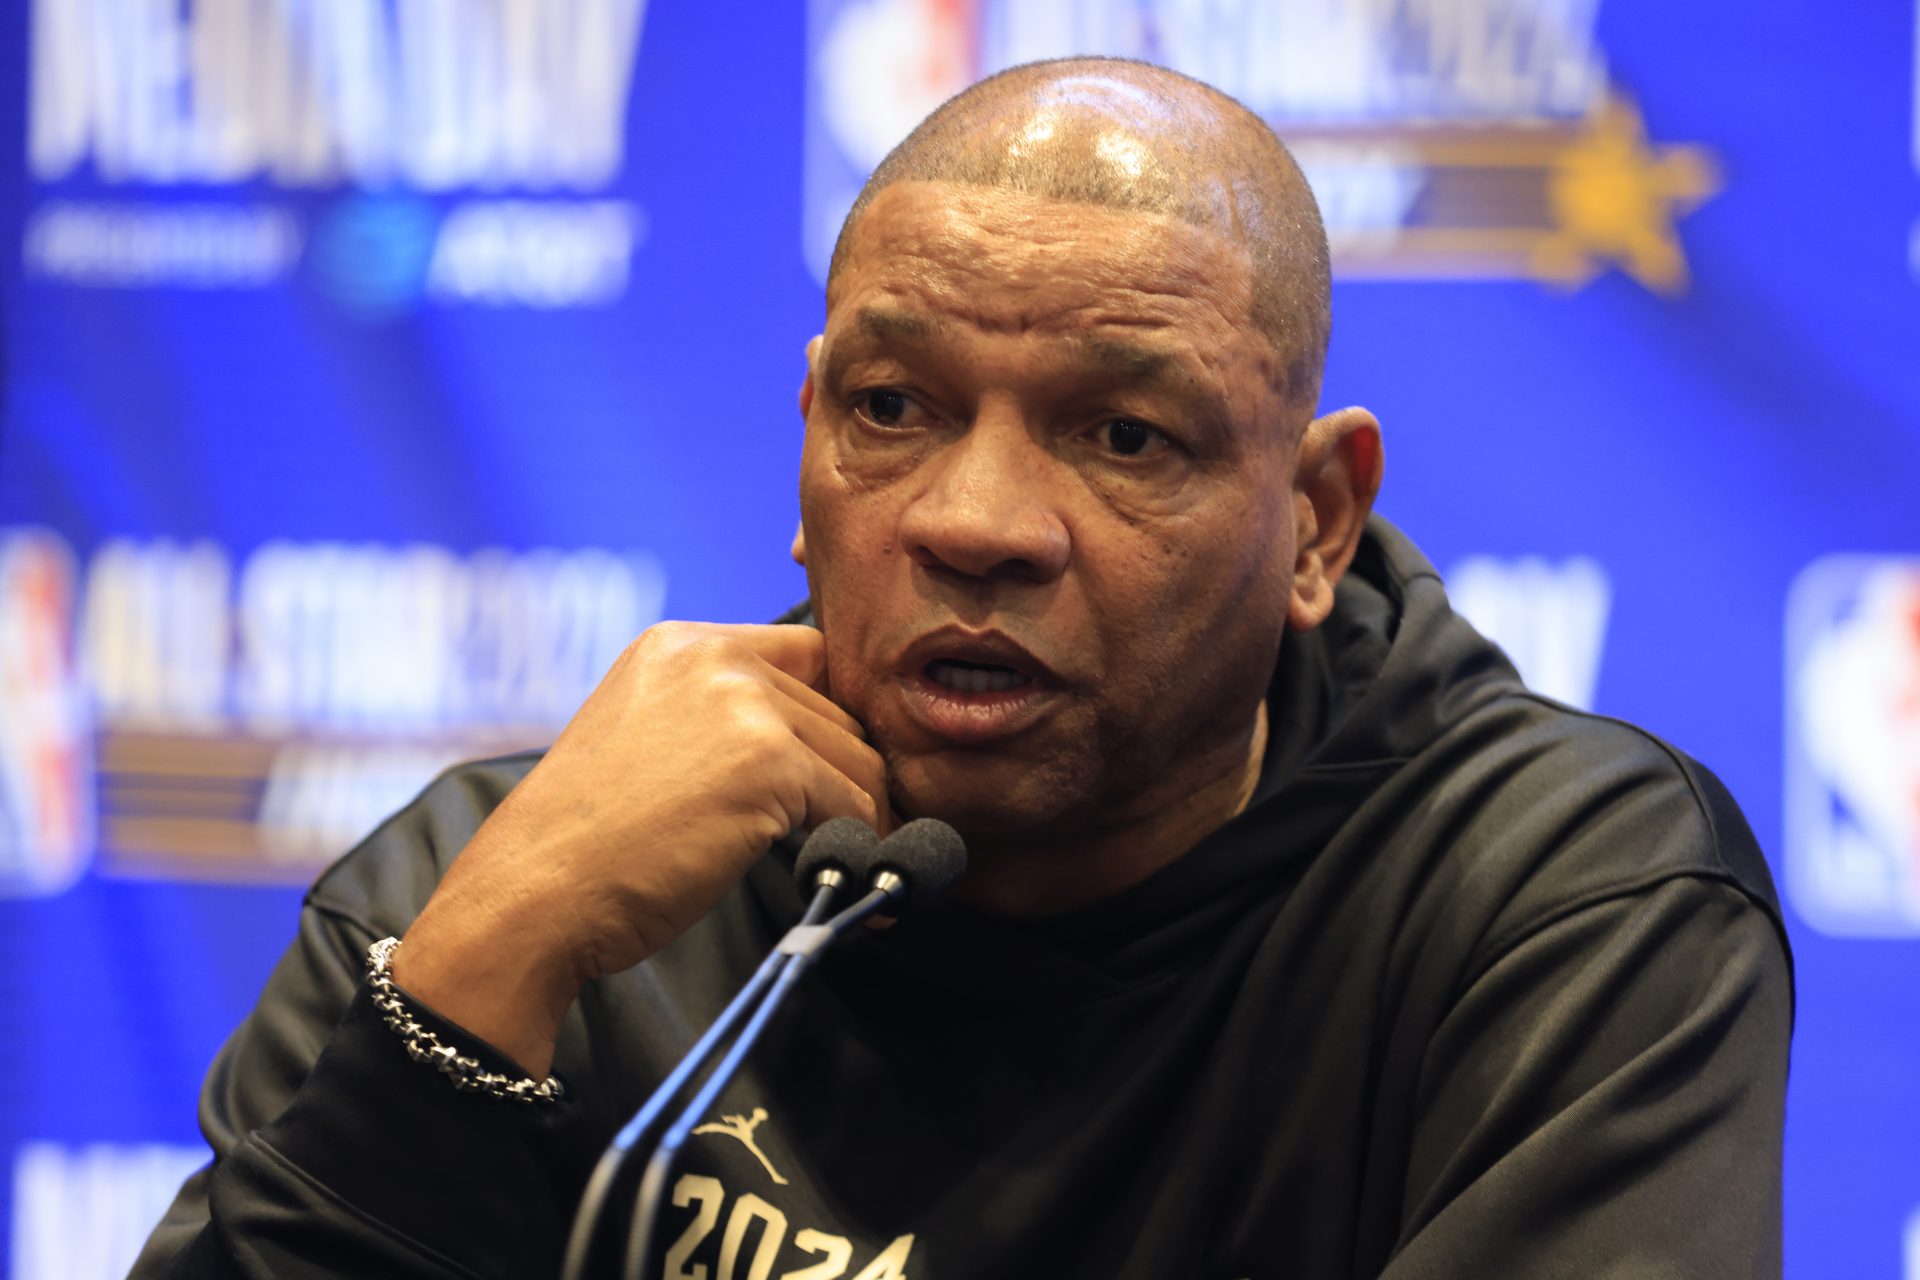 Is Doc Rivers treated fairly by the basketball community?